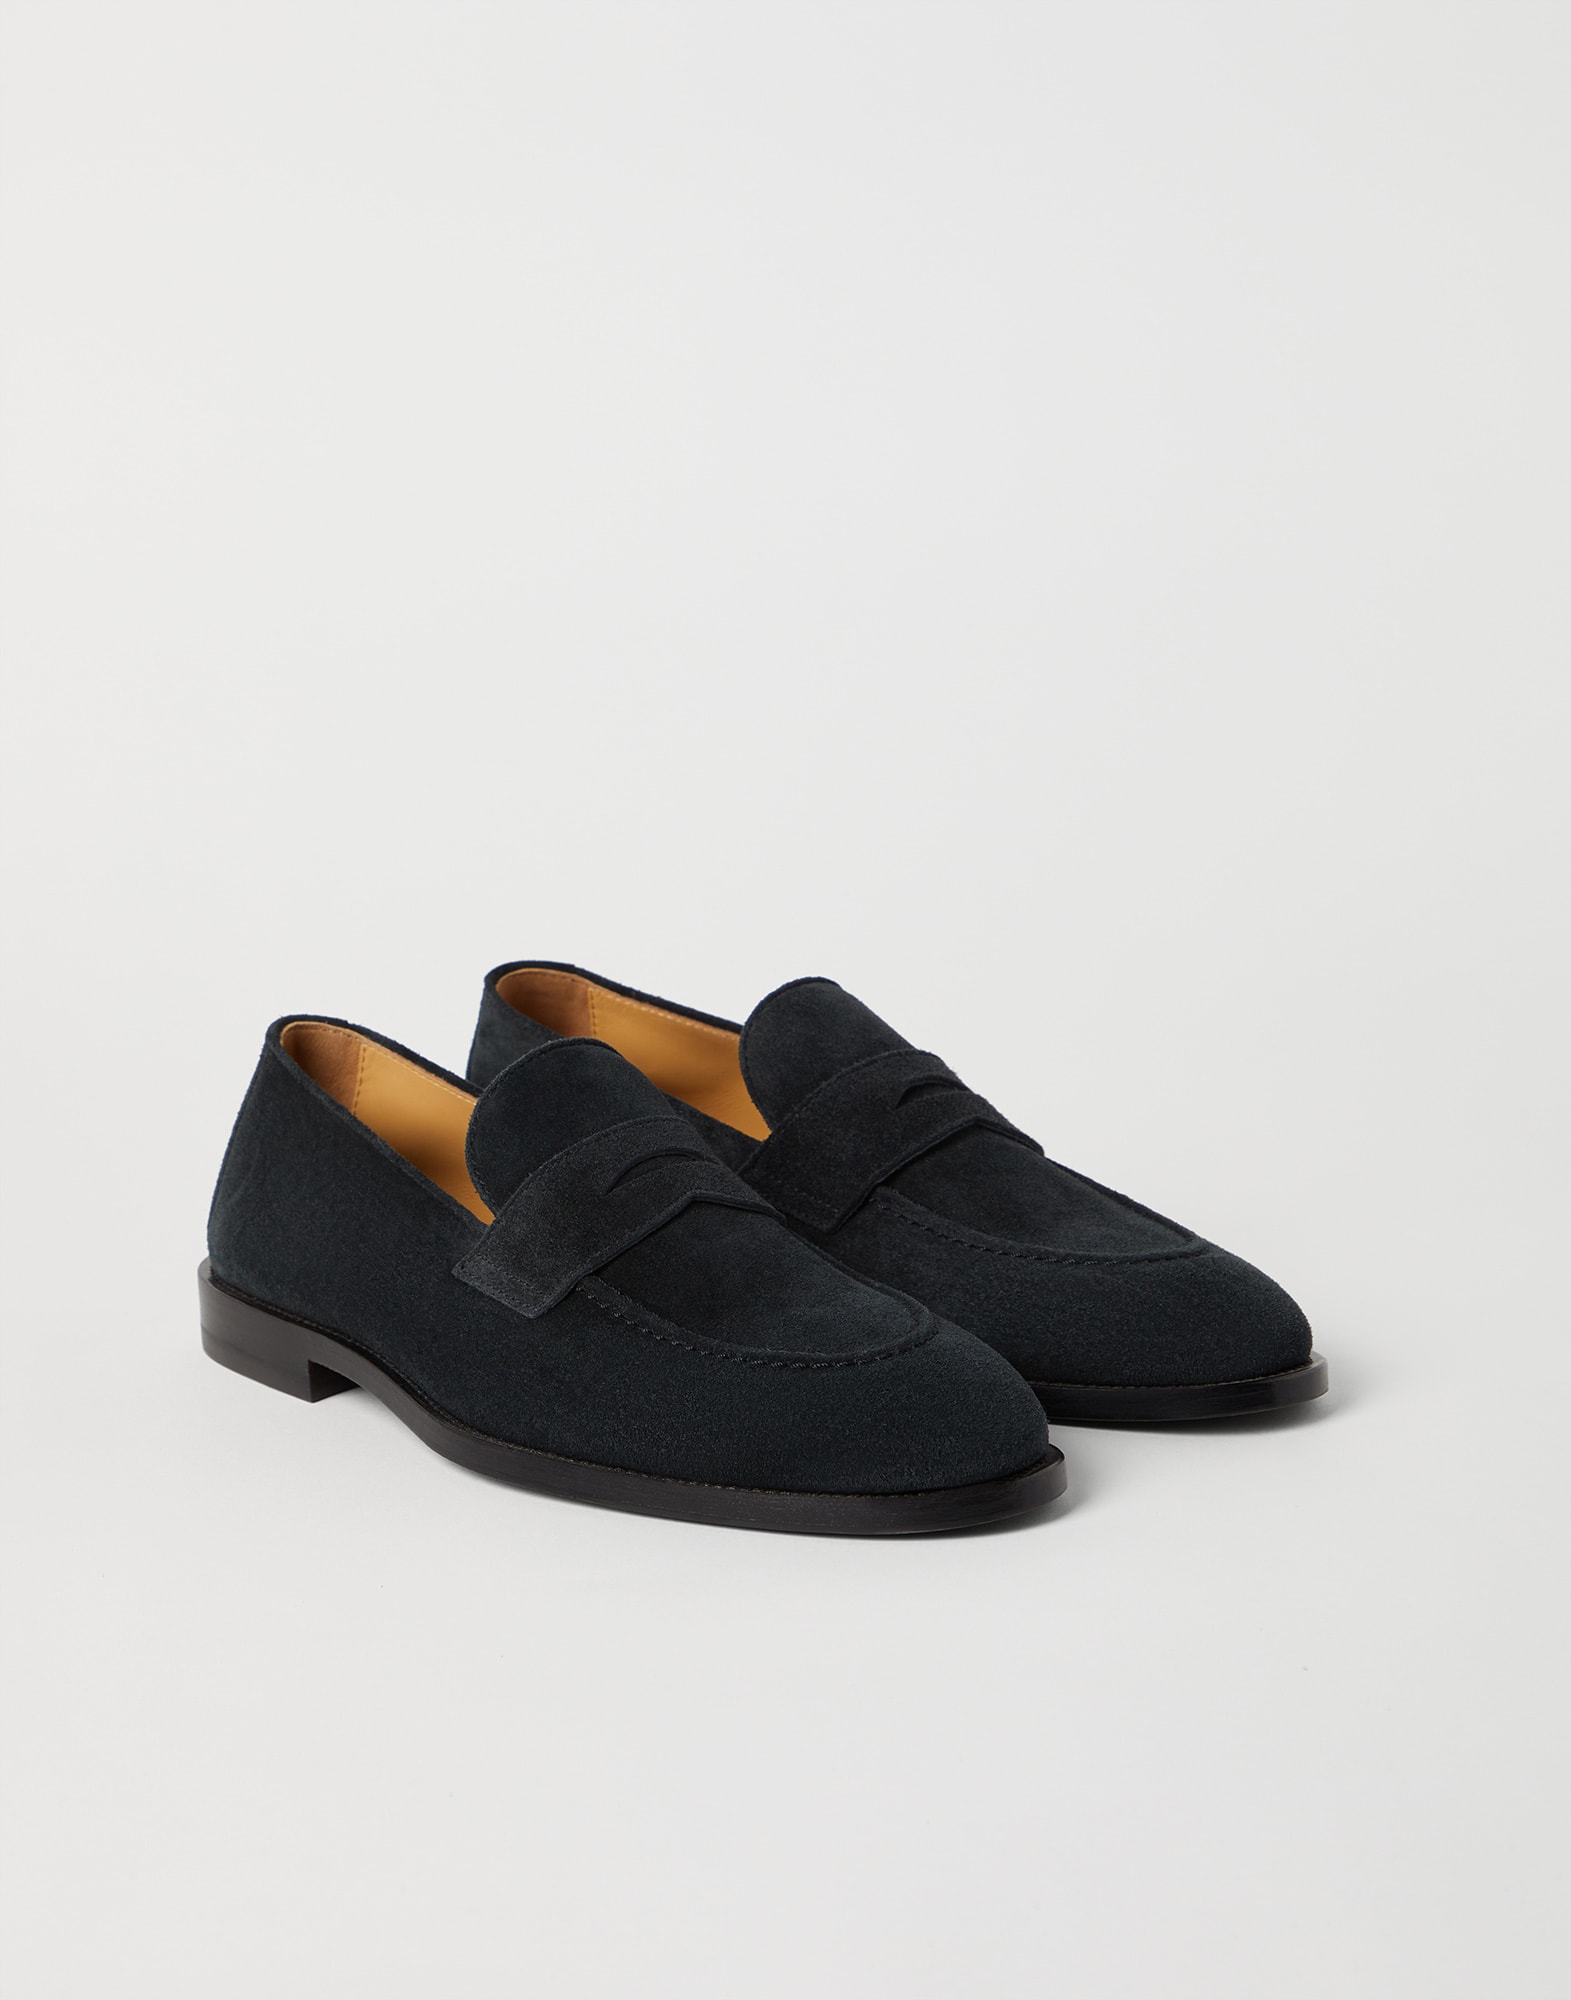 Penny loafers (241MZUCCLB702) for Man | Brunello Cucinelli